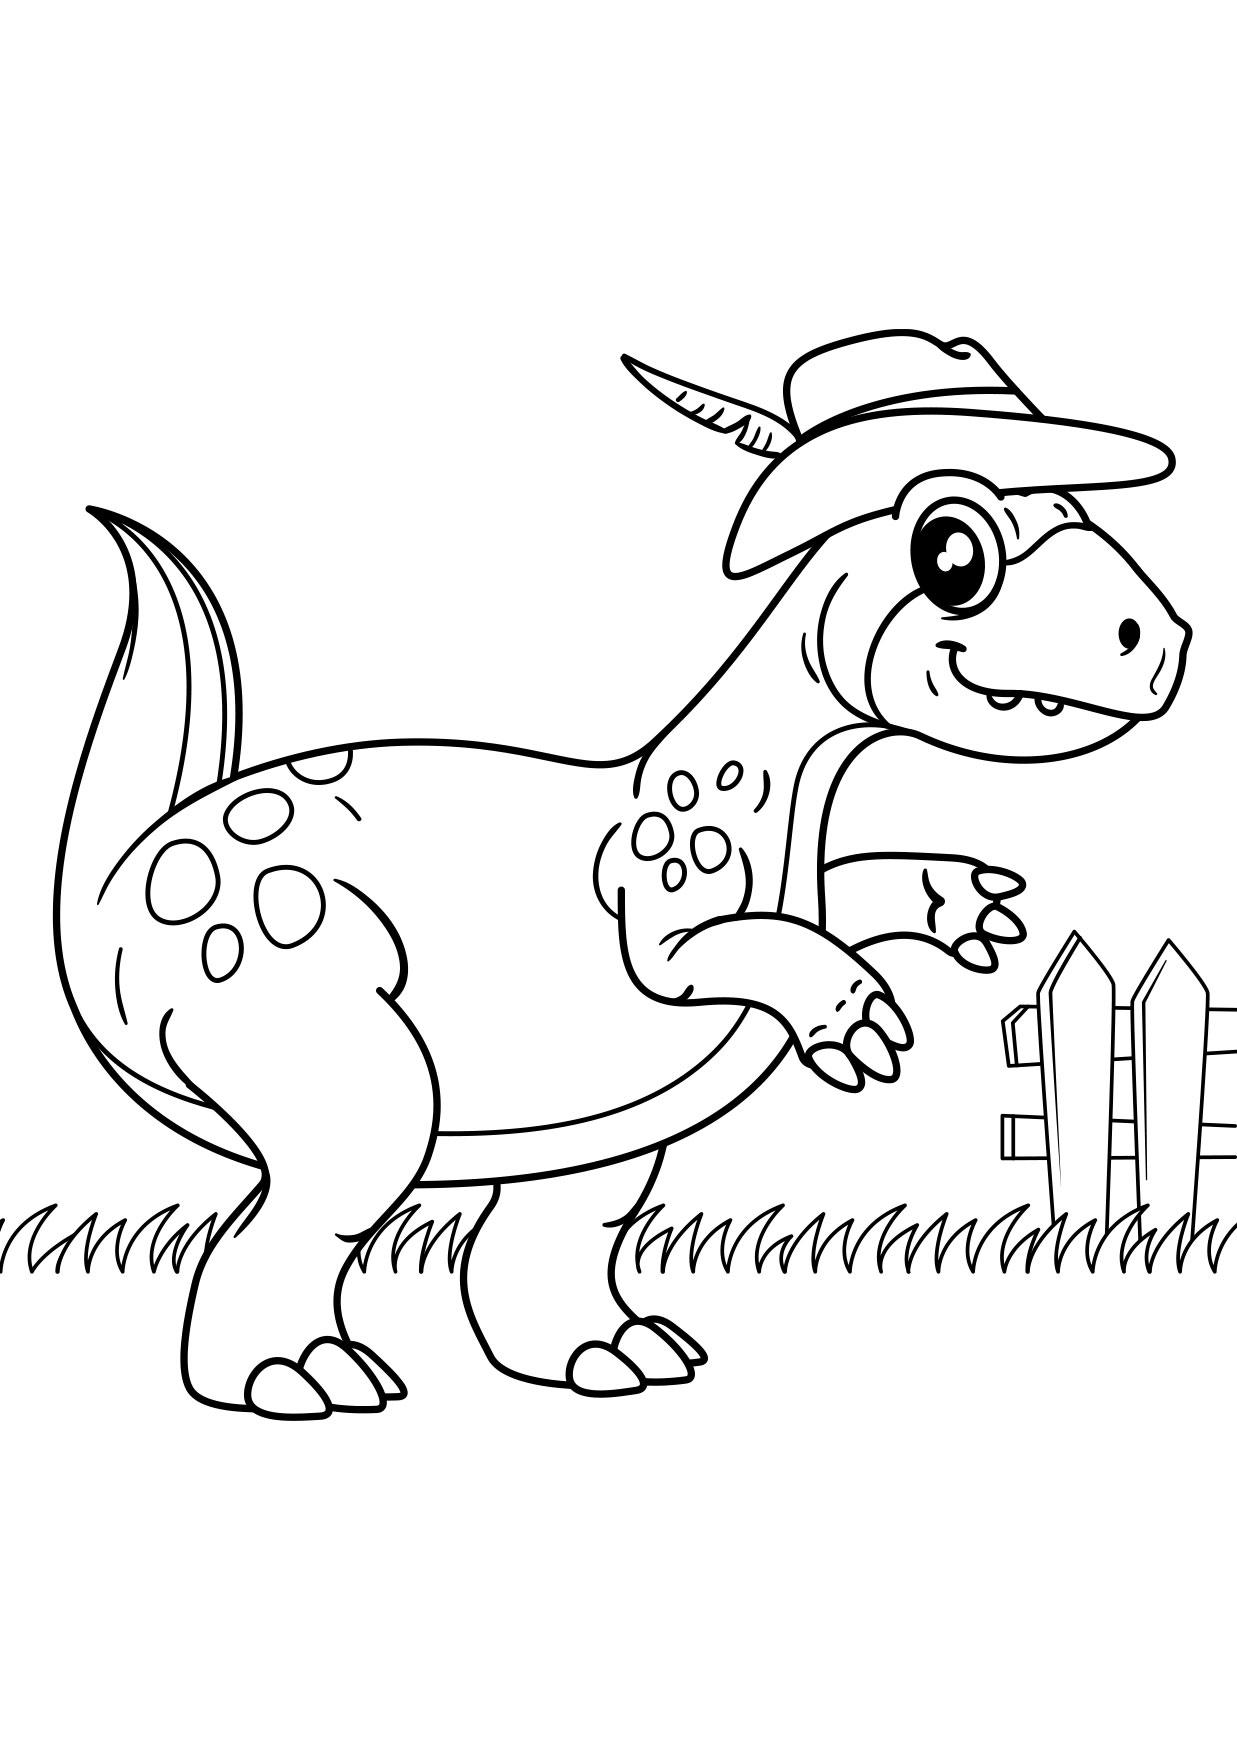 Coloring page dinosaur goes for a walk